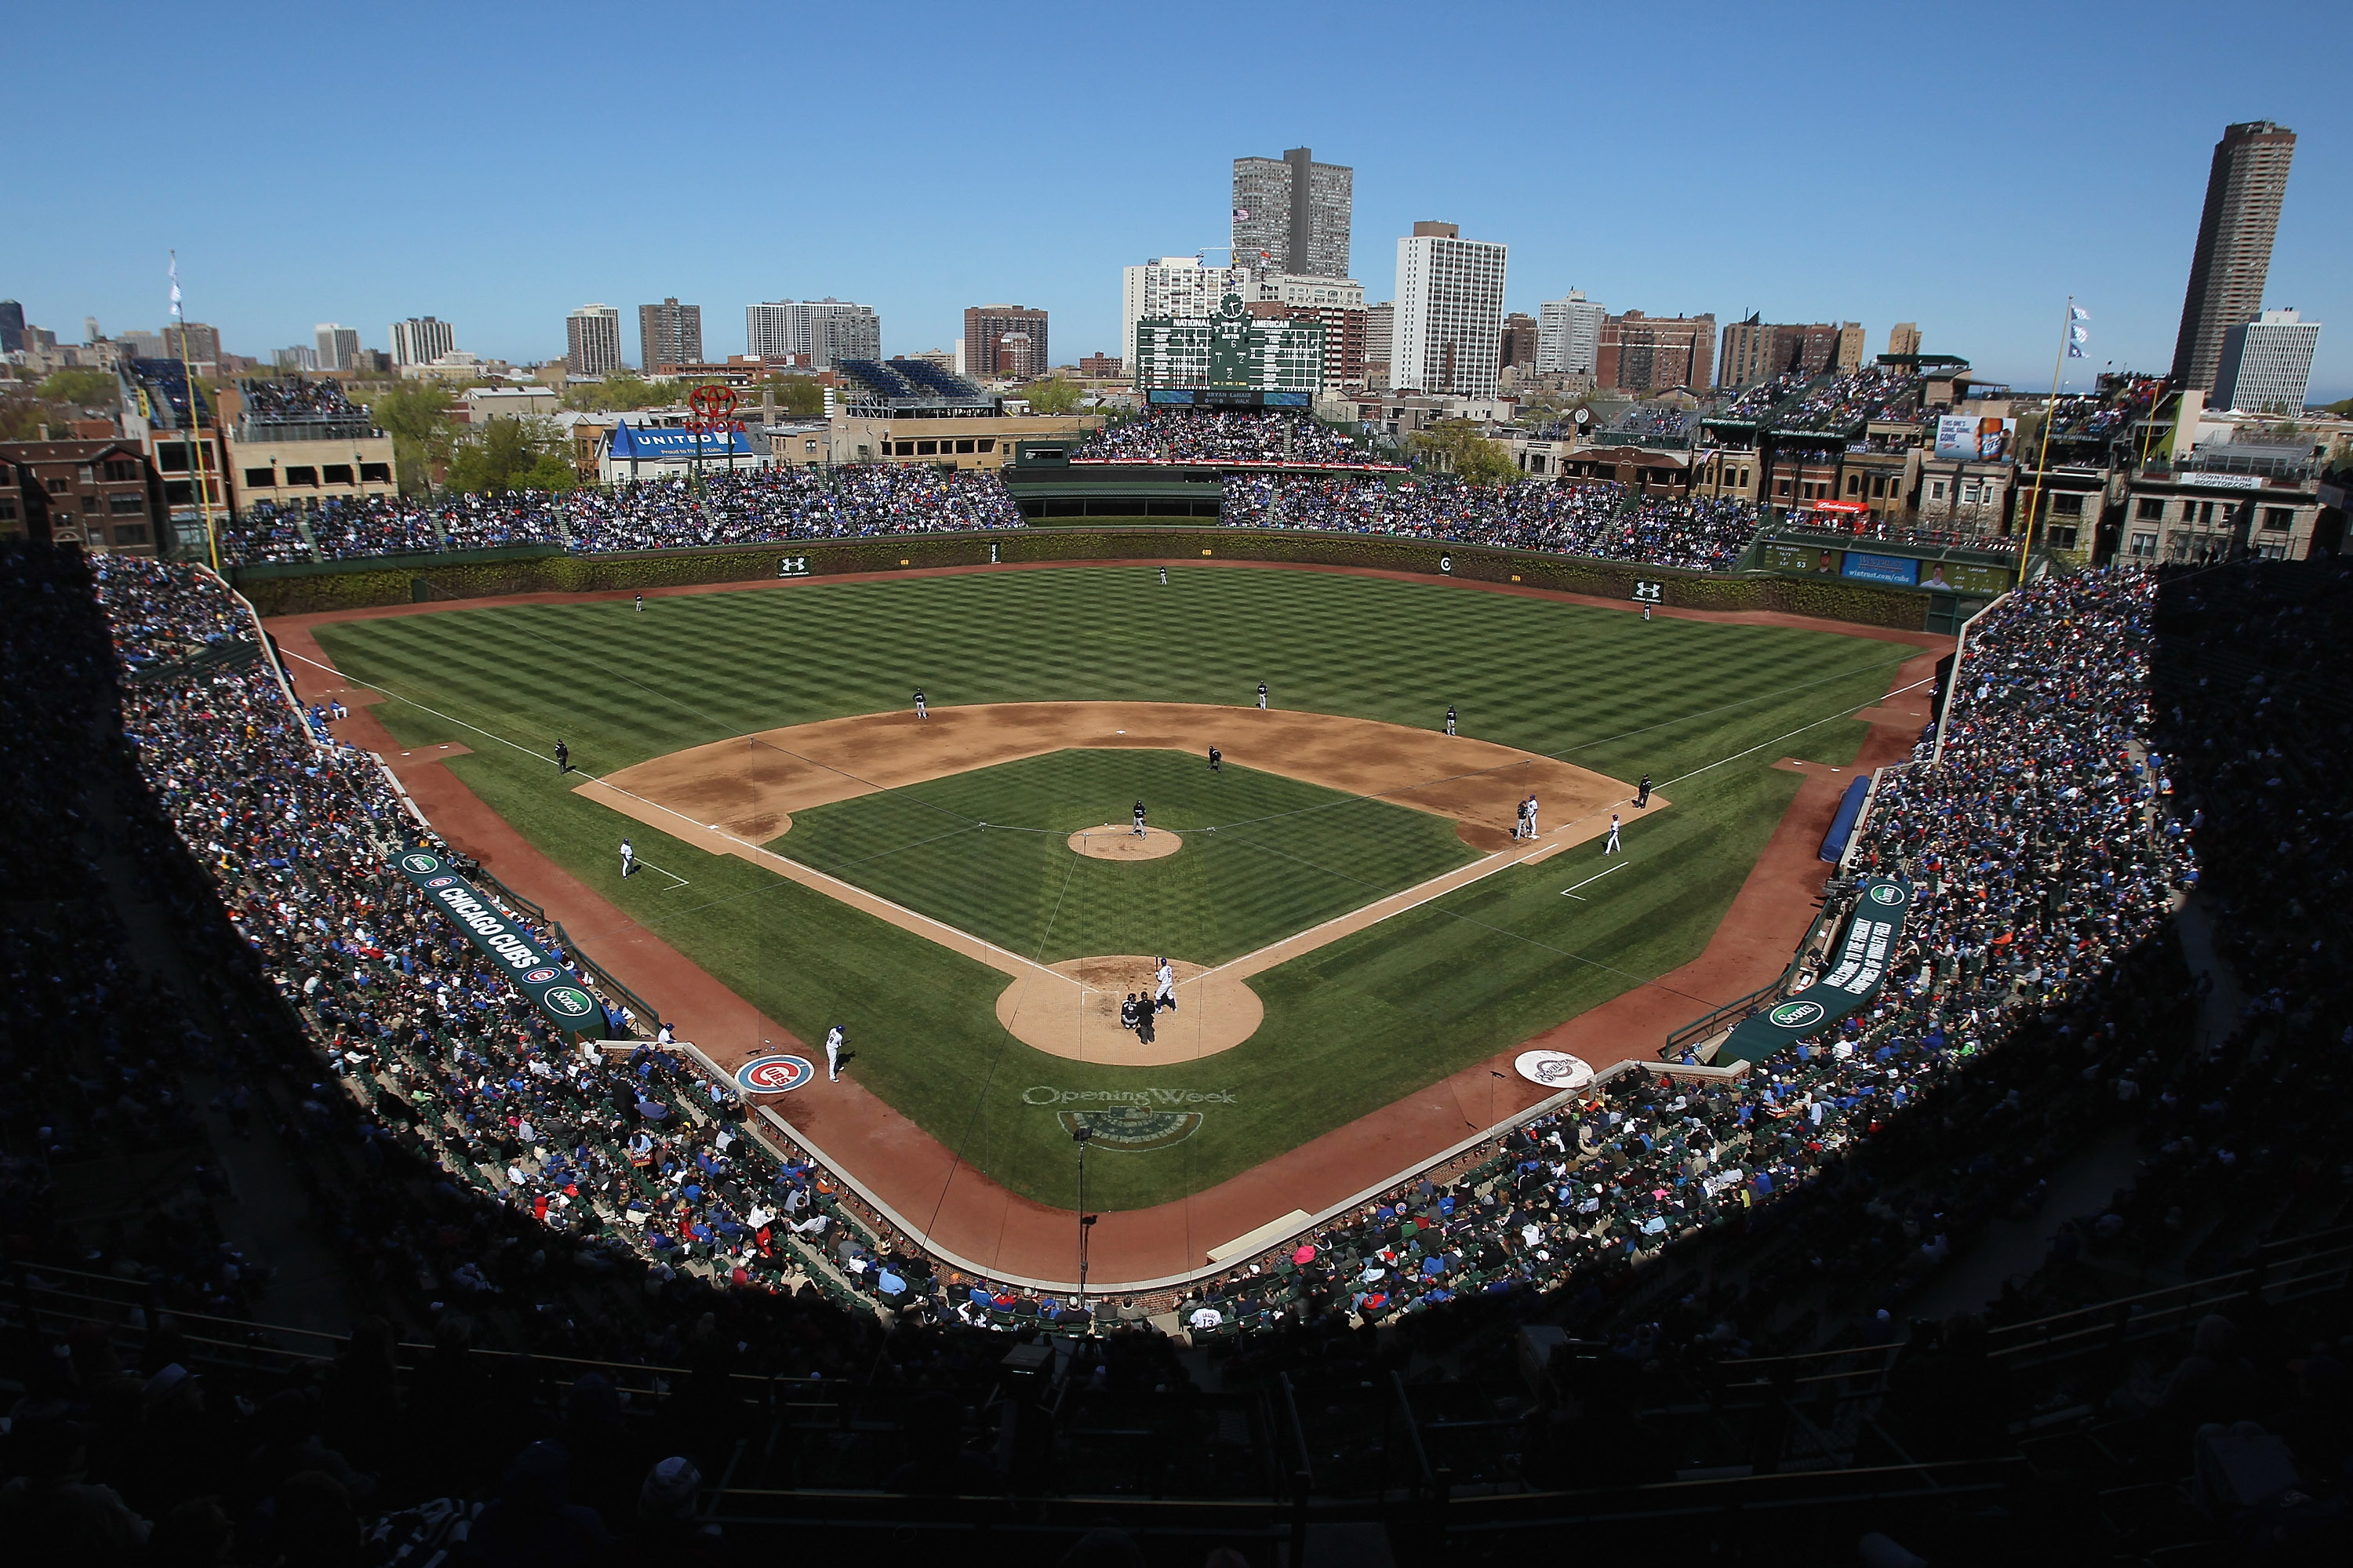 The 10 MLB Stadiums You Should Never Visit, According to Yelp